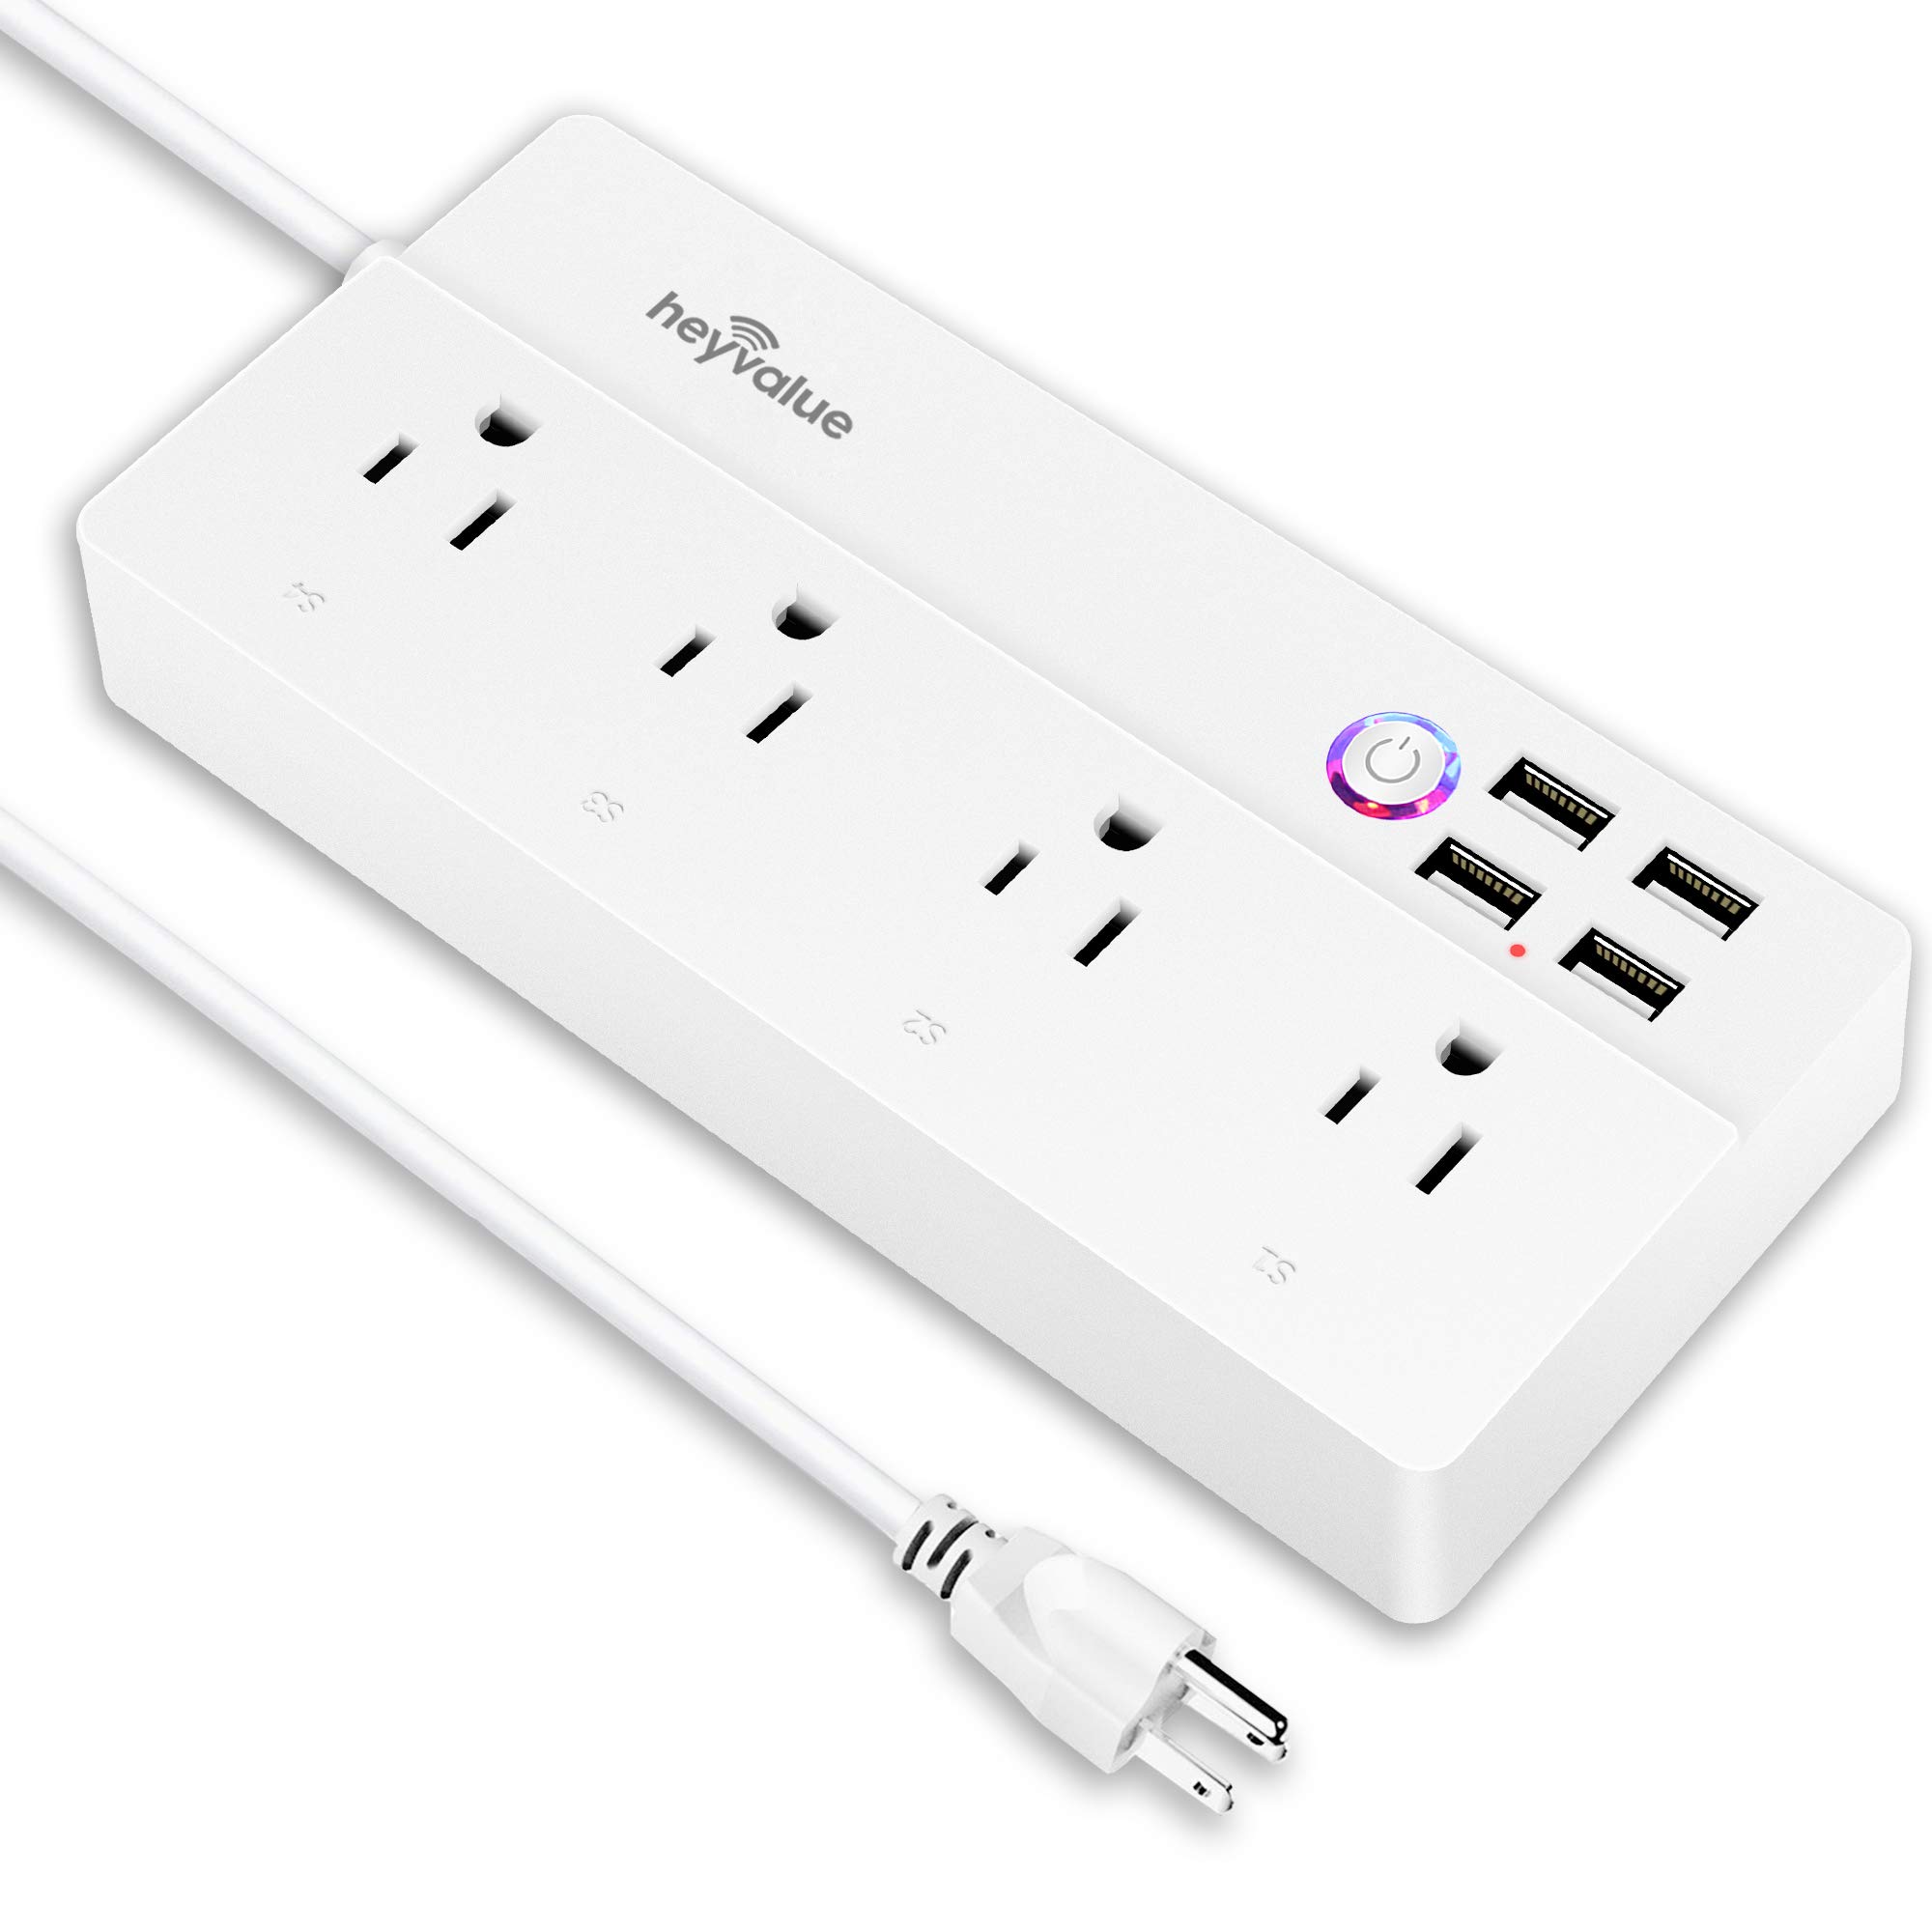 Smart Power Strip, Wifi Surge Protector, Voice Control with Alexa & Google Home, 4 AC Outlets 4 USB Port with 6-Foot Cord, App Control Appliances, Individual Control, Timing Schedule, No Hub Required